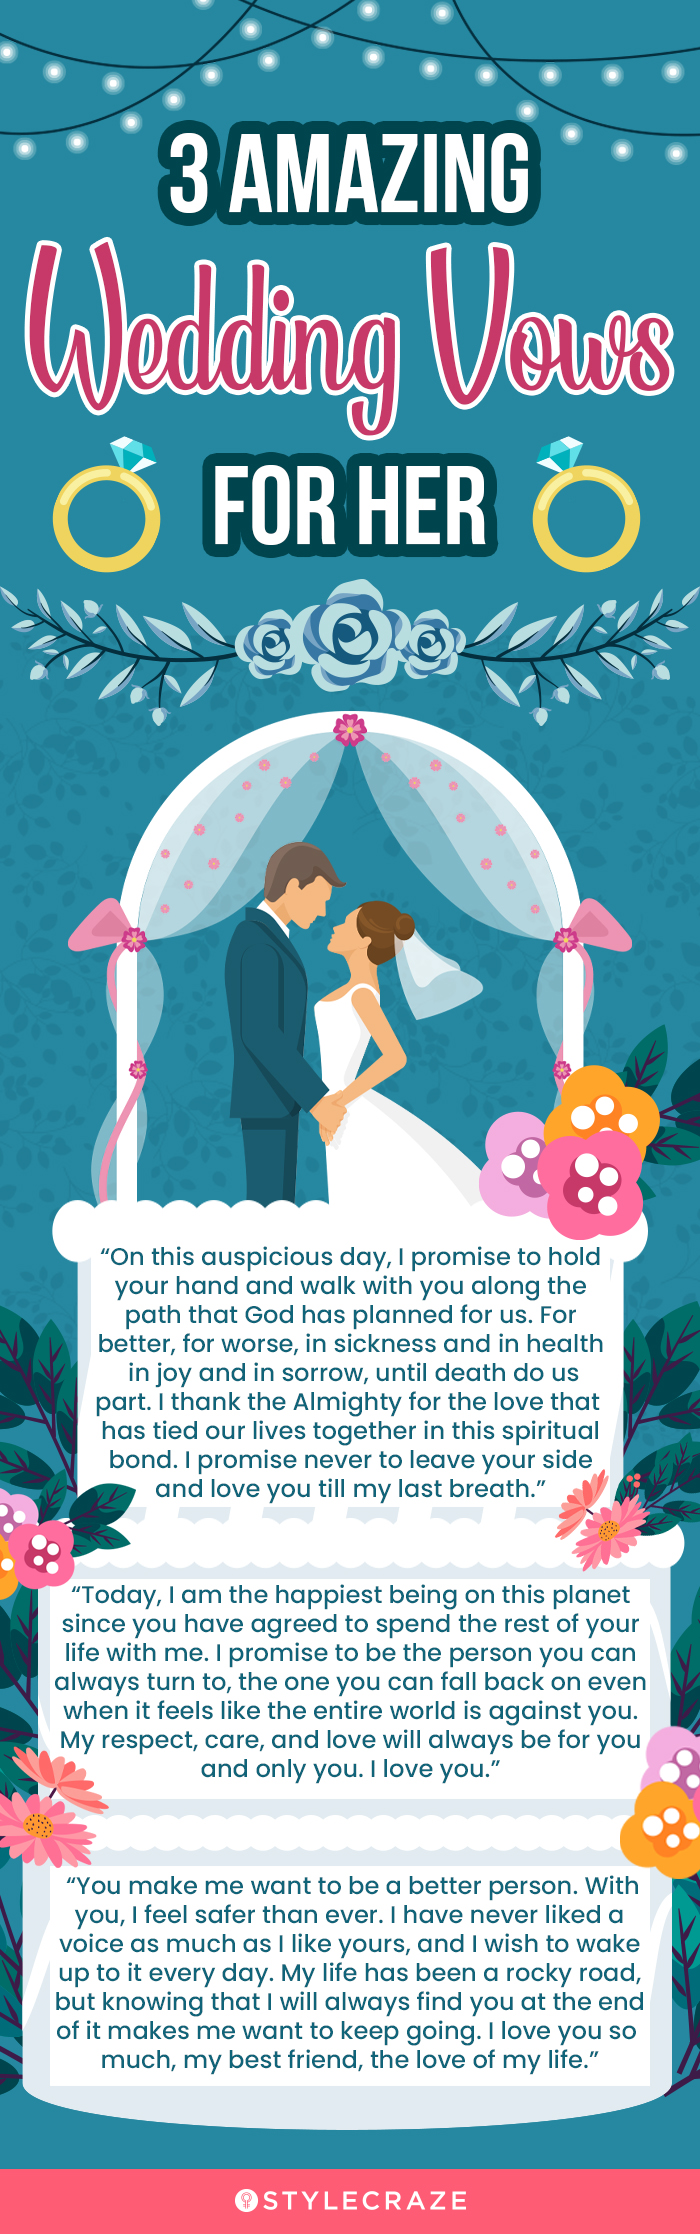 Heartfelt Wedding Vows That Will Leave Your Husband Floored